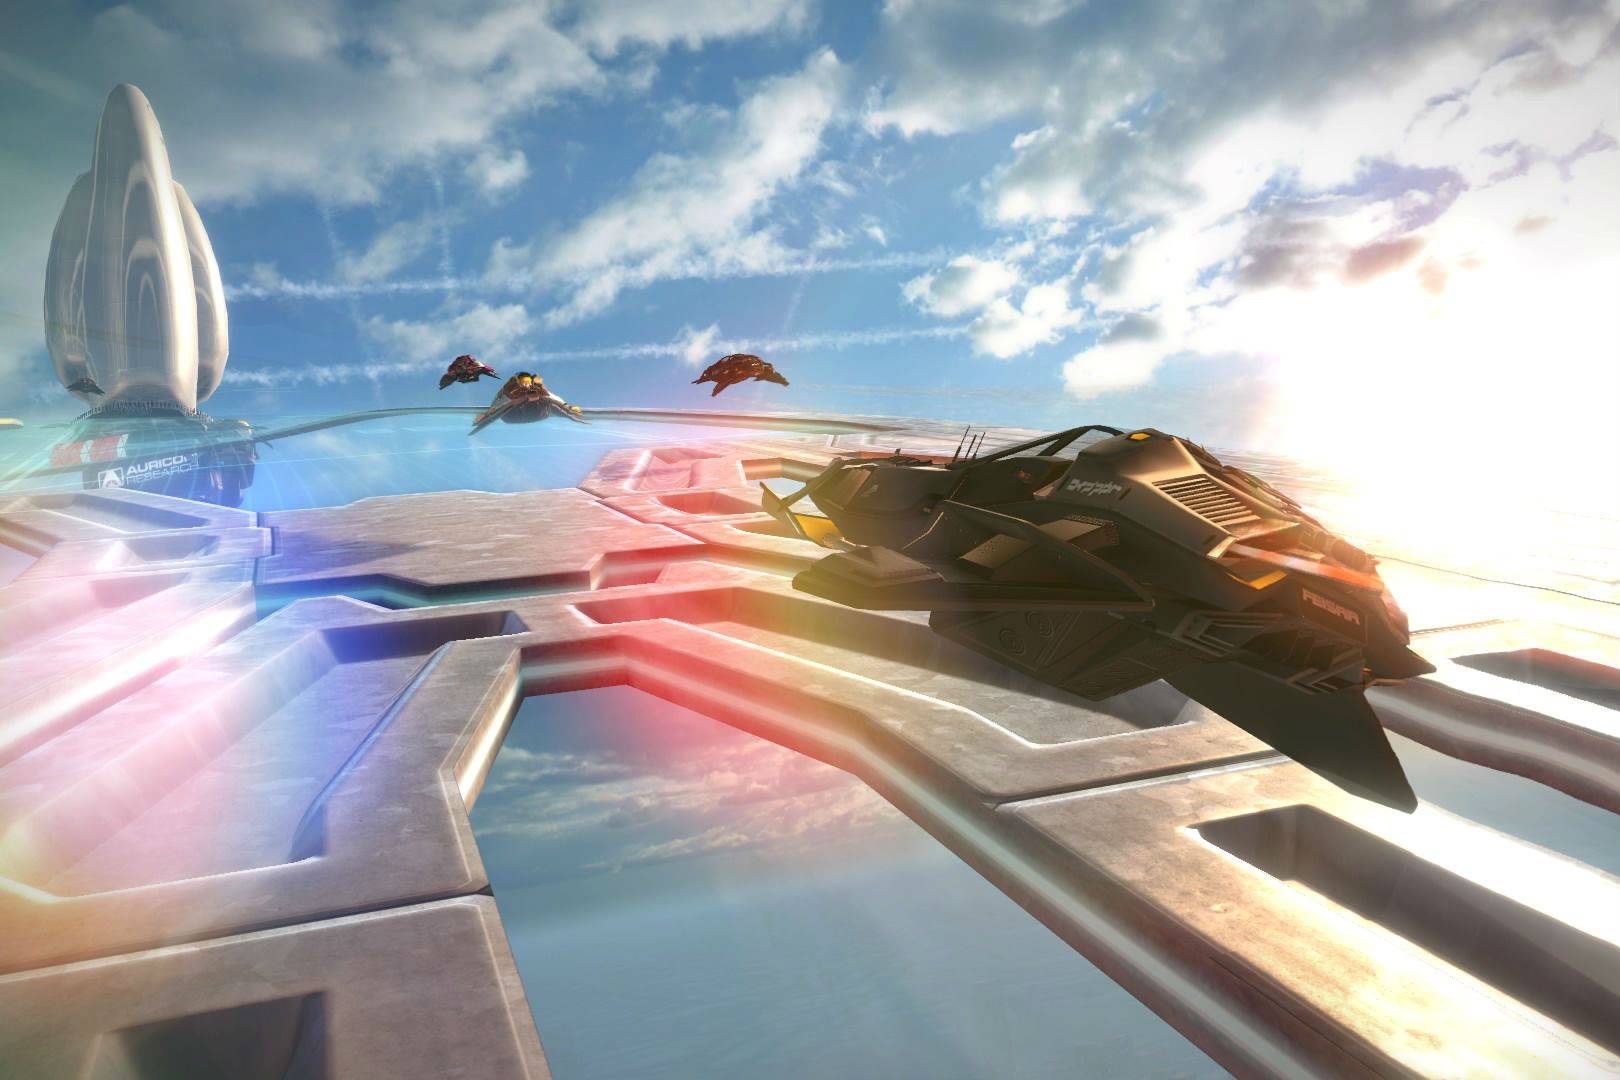 wipeout omega collection